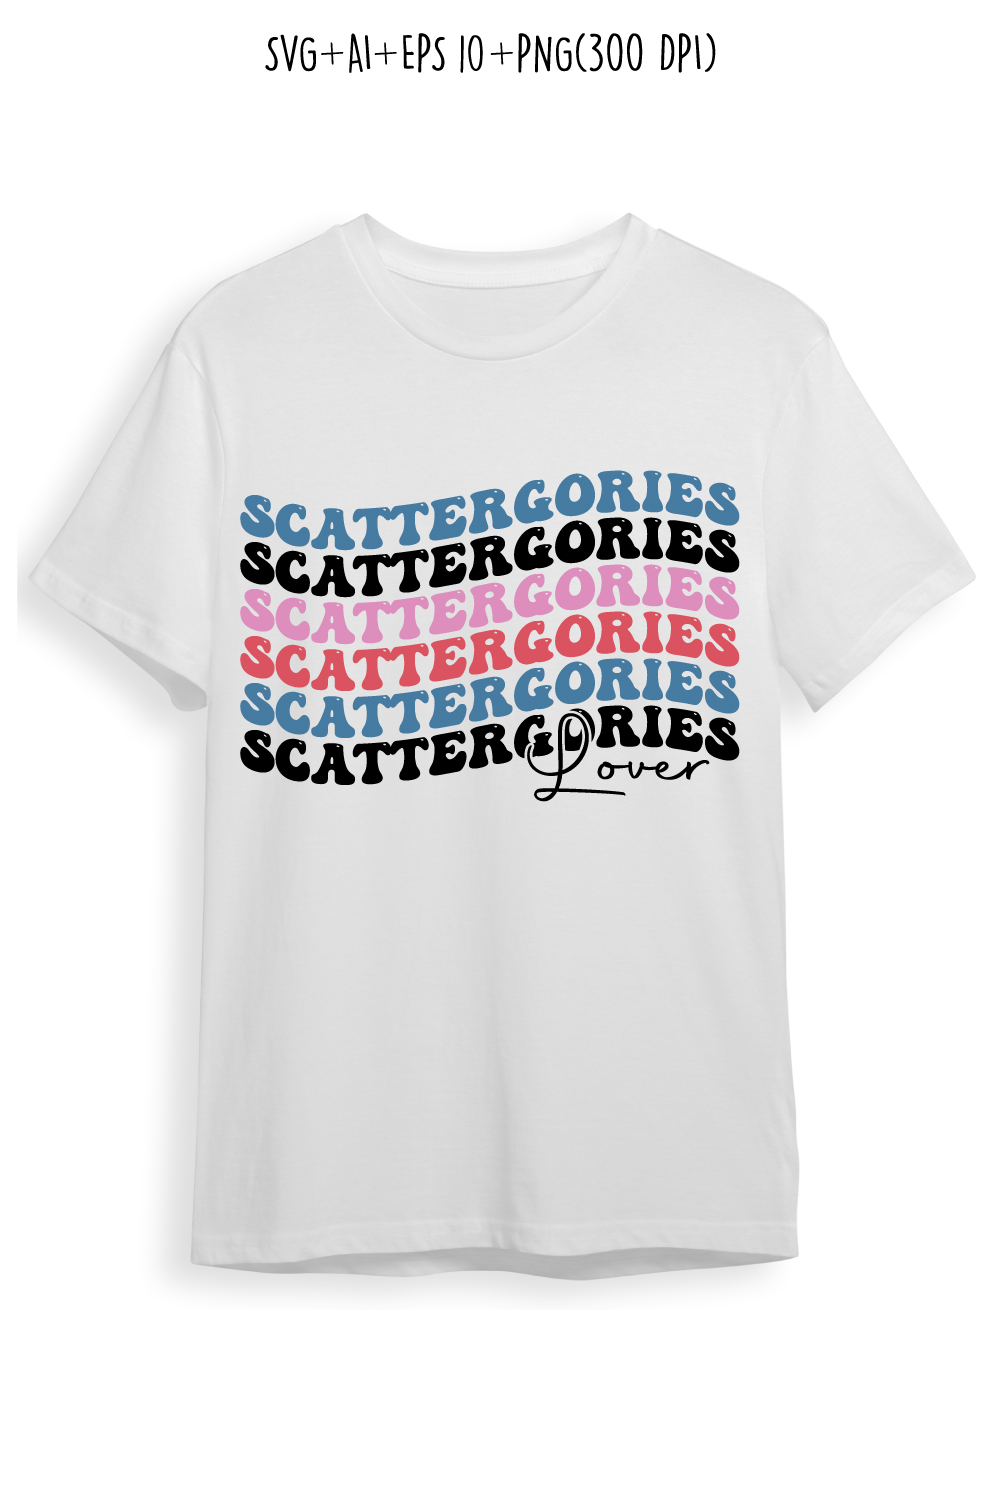 Scattergories lover indoor game retro typography design for t-shirts, cards, frame artwork, phone cases, bags, mugs, stickers, tumblers, print, etc pinterest preview image.